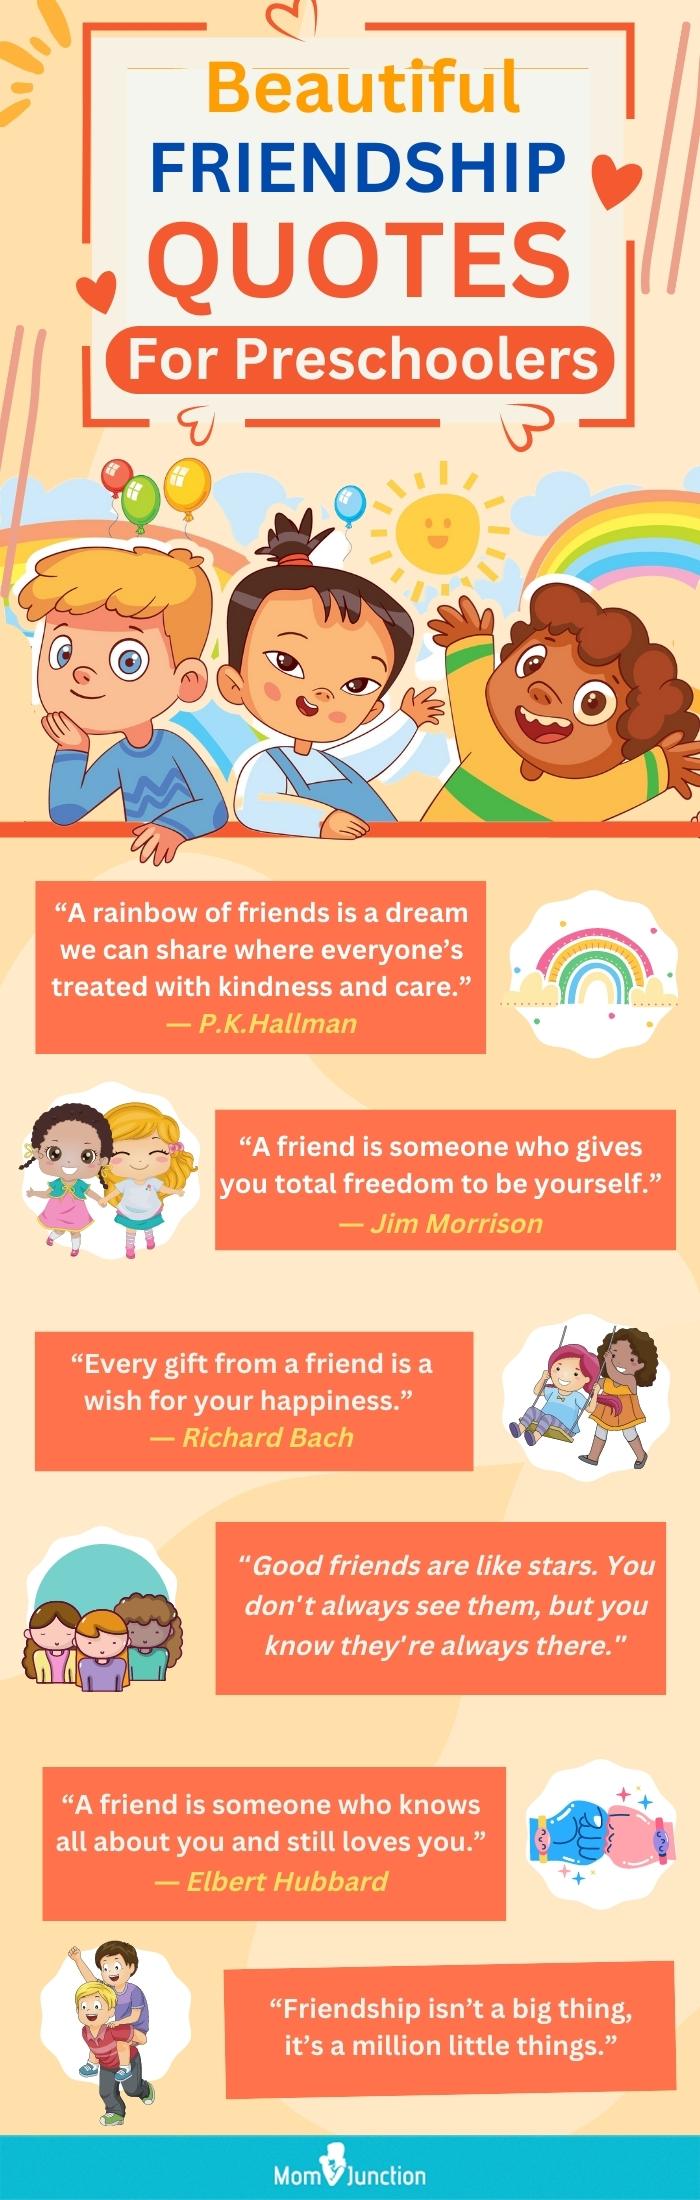 friendship quotes for preschoolers (infographic)